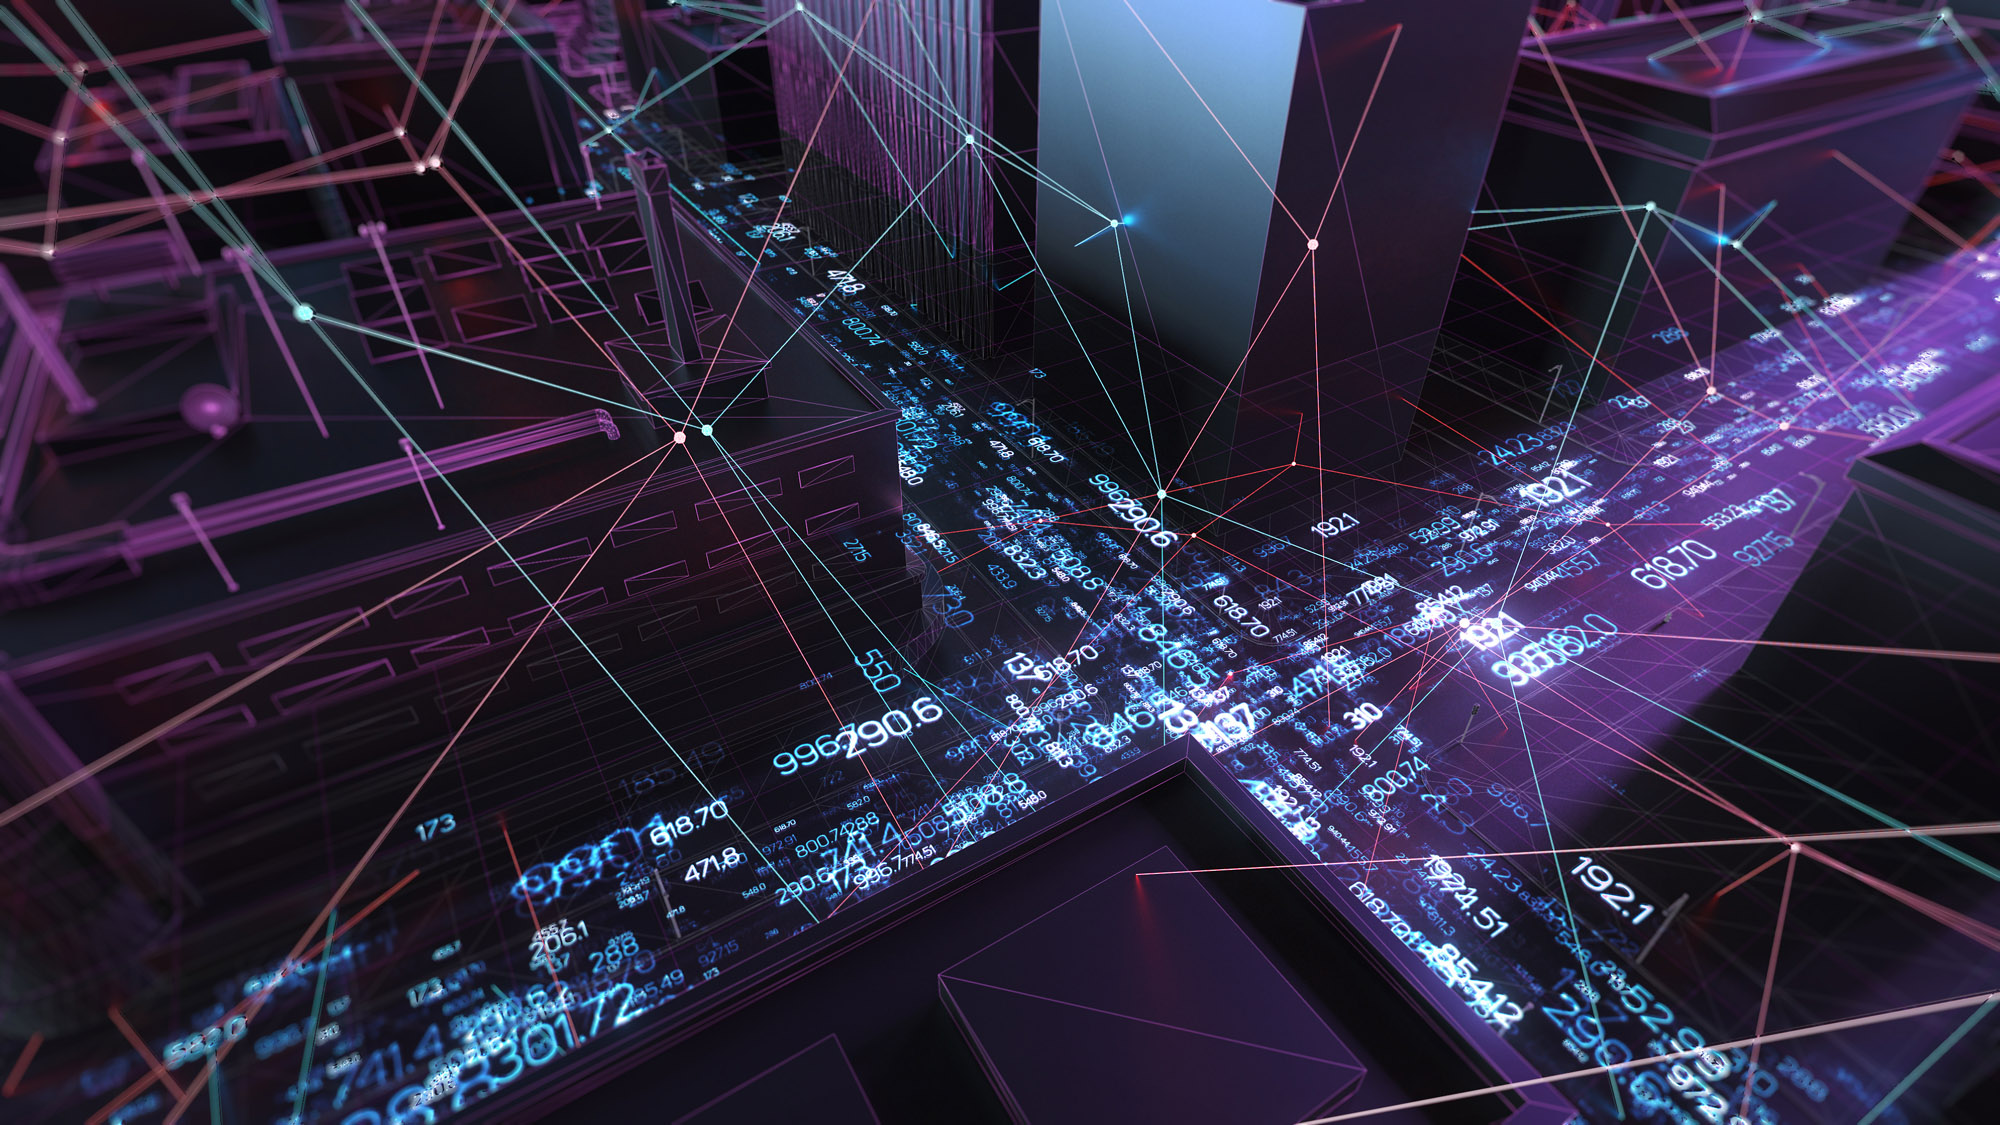 Abstract 3d city rendering with lines and digital elements. Digital skyscrappers with wire texture and random digits array. Perspective architecture background with wireframe skyscrapers.